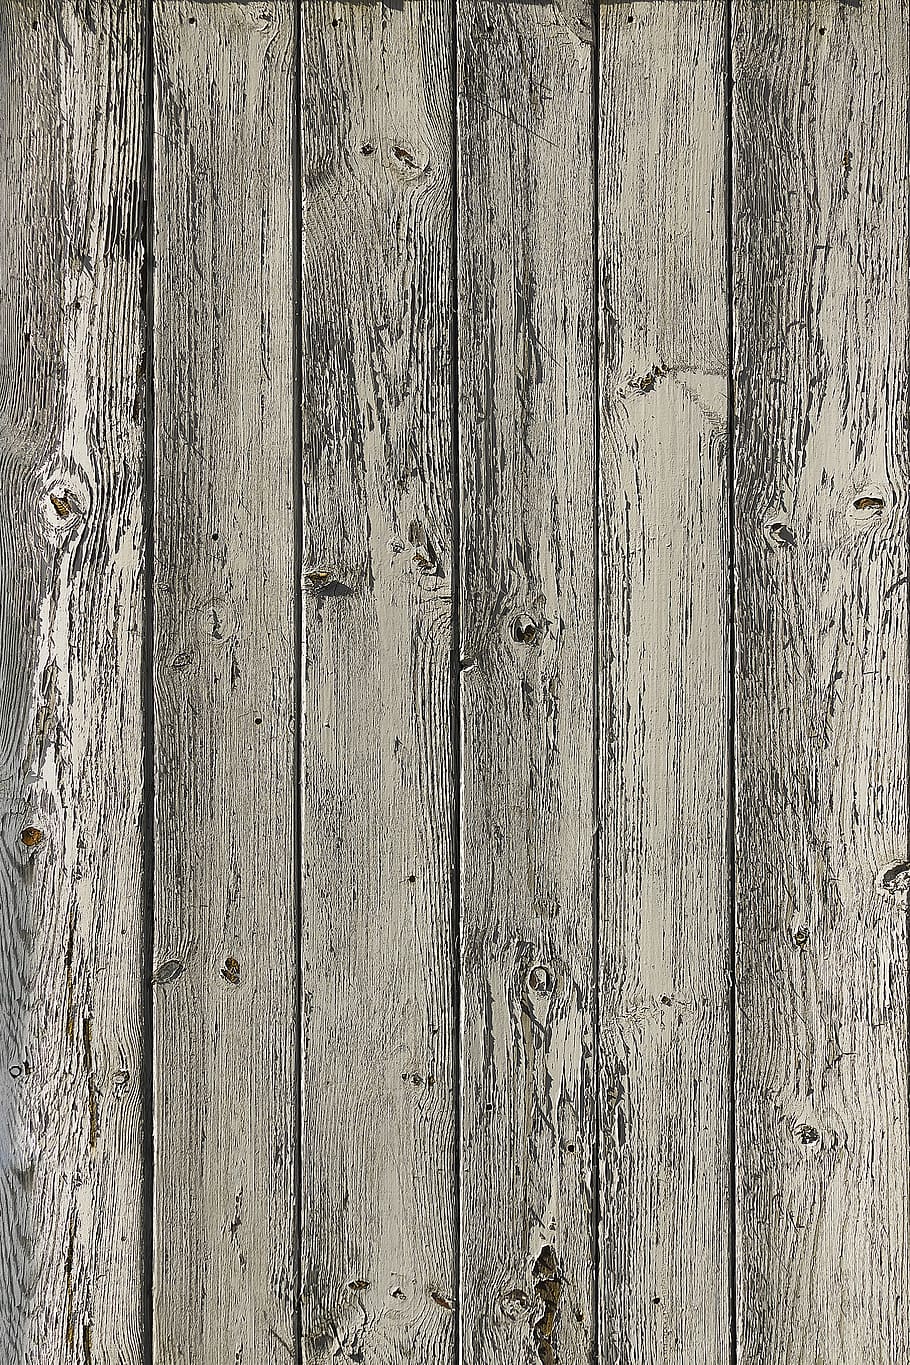 wood, boards, rustic, profile wood, branches, spruce, spruce wood, weathered, battens, background